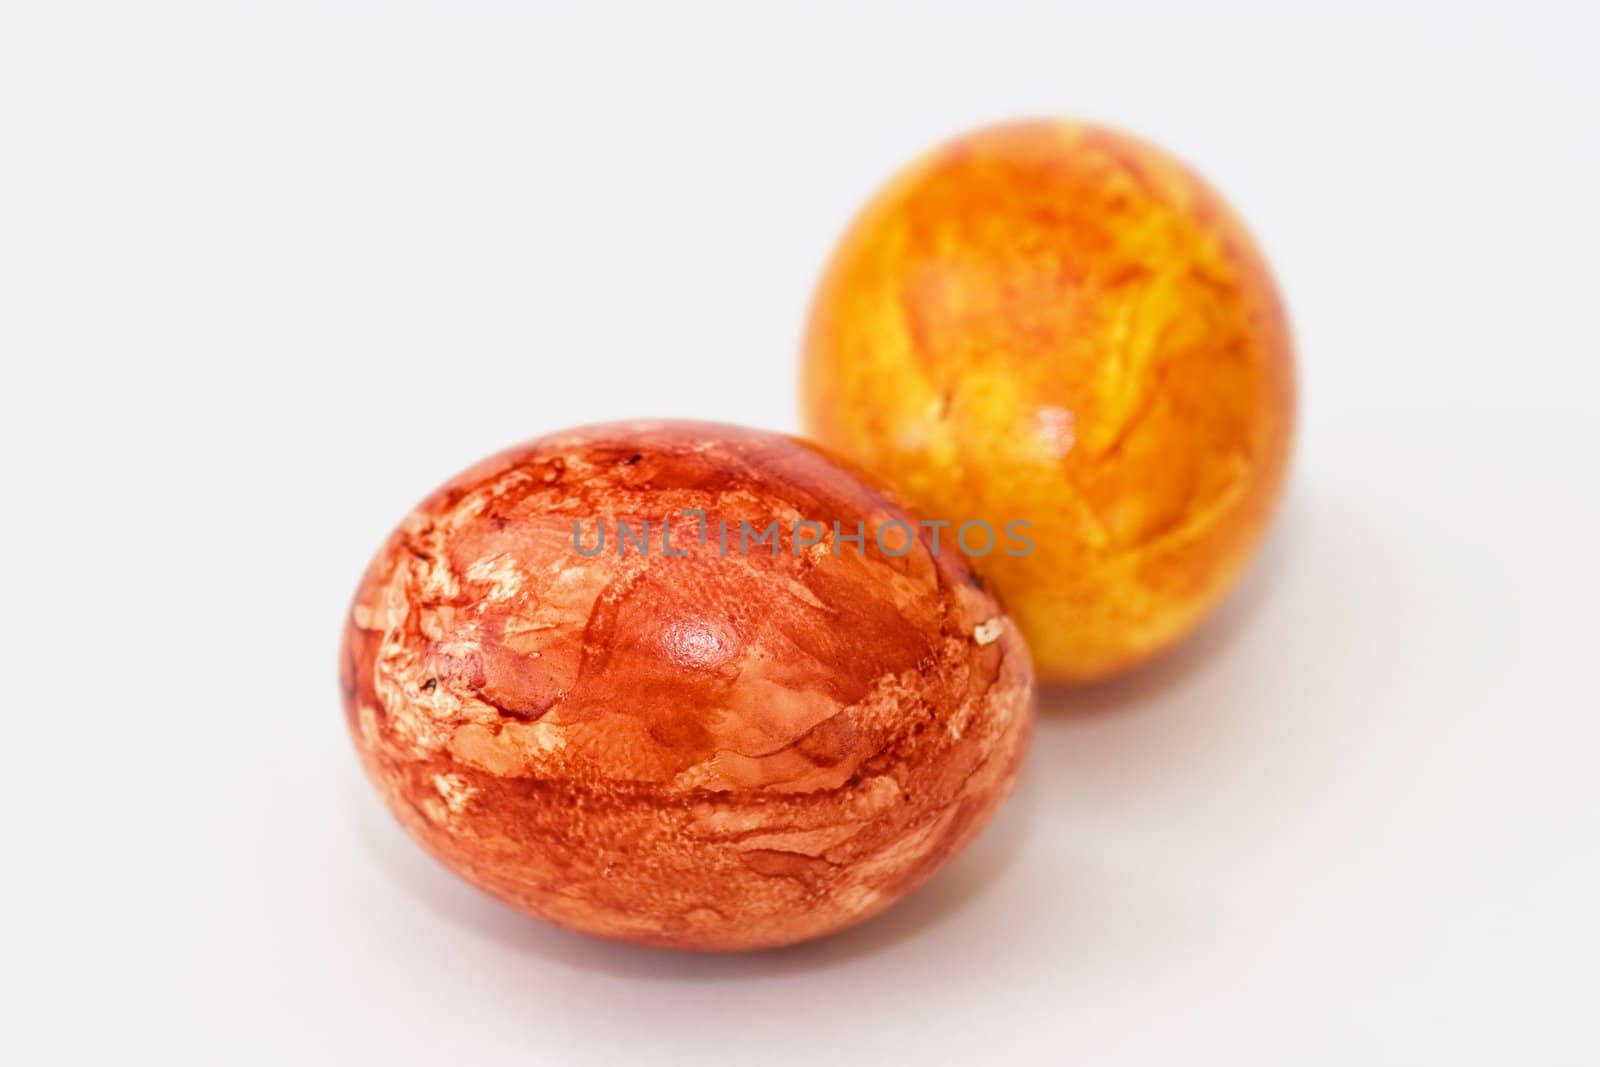 Colored eggs on white background